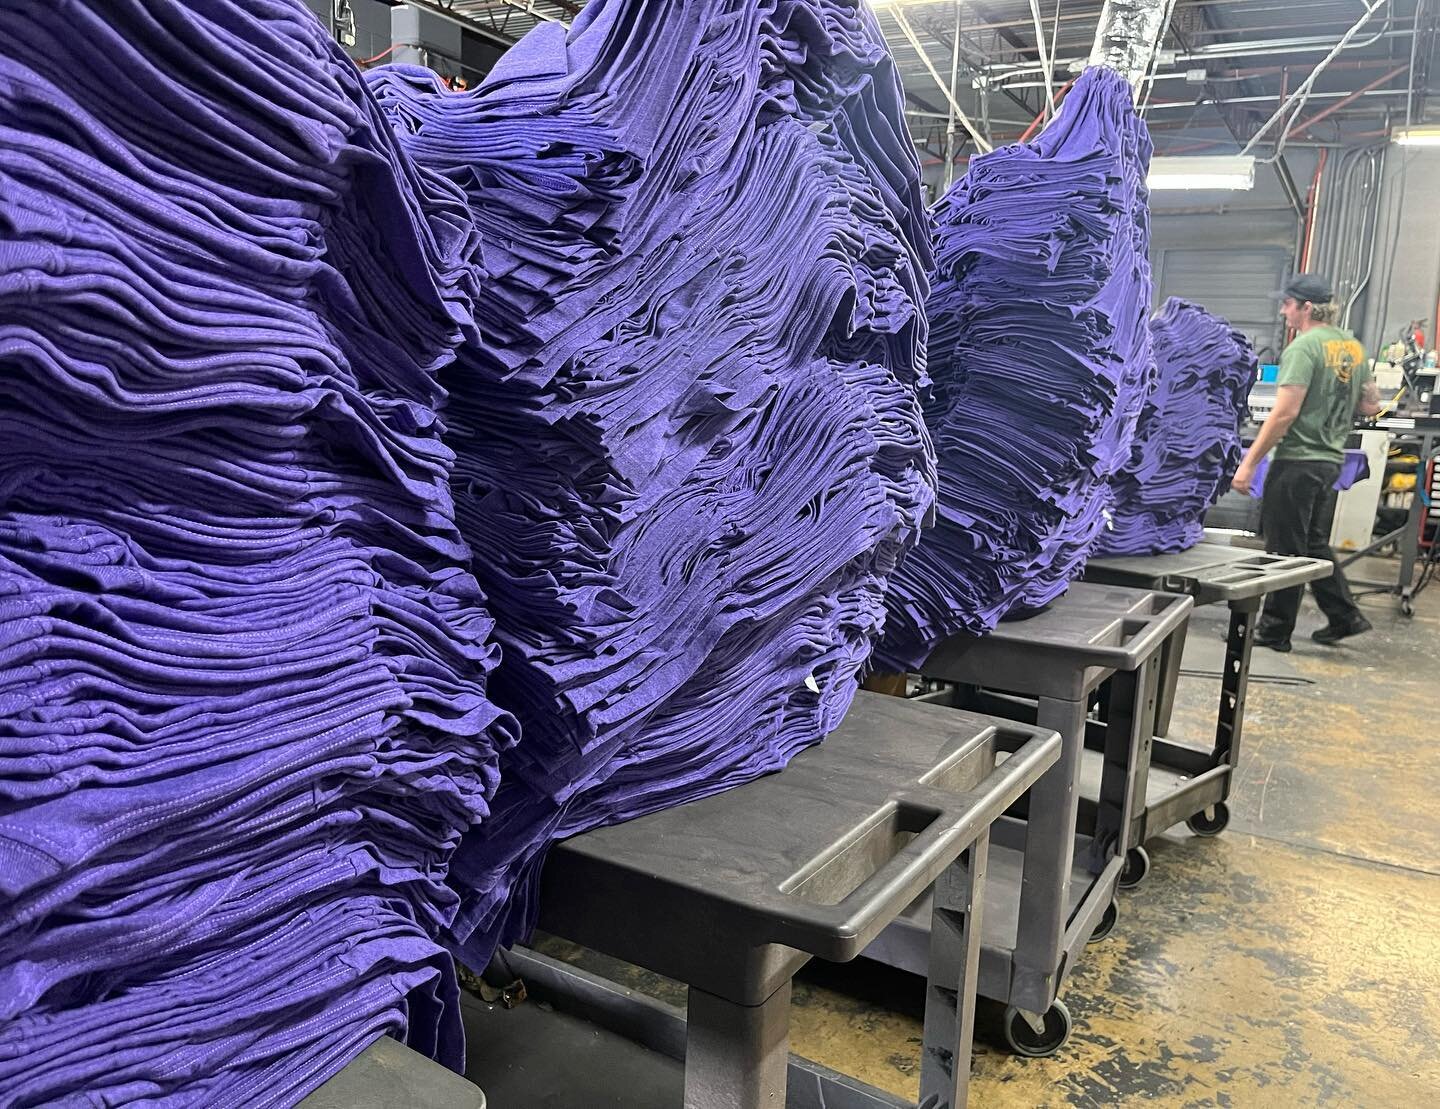 Happy Monday folks! 
It&rsquo;s been cold down here but we&rsquo;re printing tees for those warm spring events. If you got an event coming up make sure to visit our website for a quote www.acescreen.com 
#getaquote #printlocal